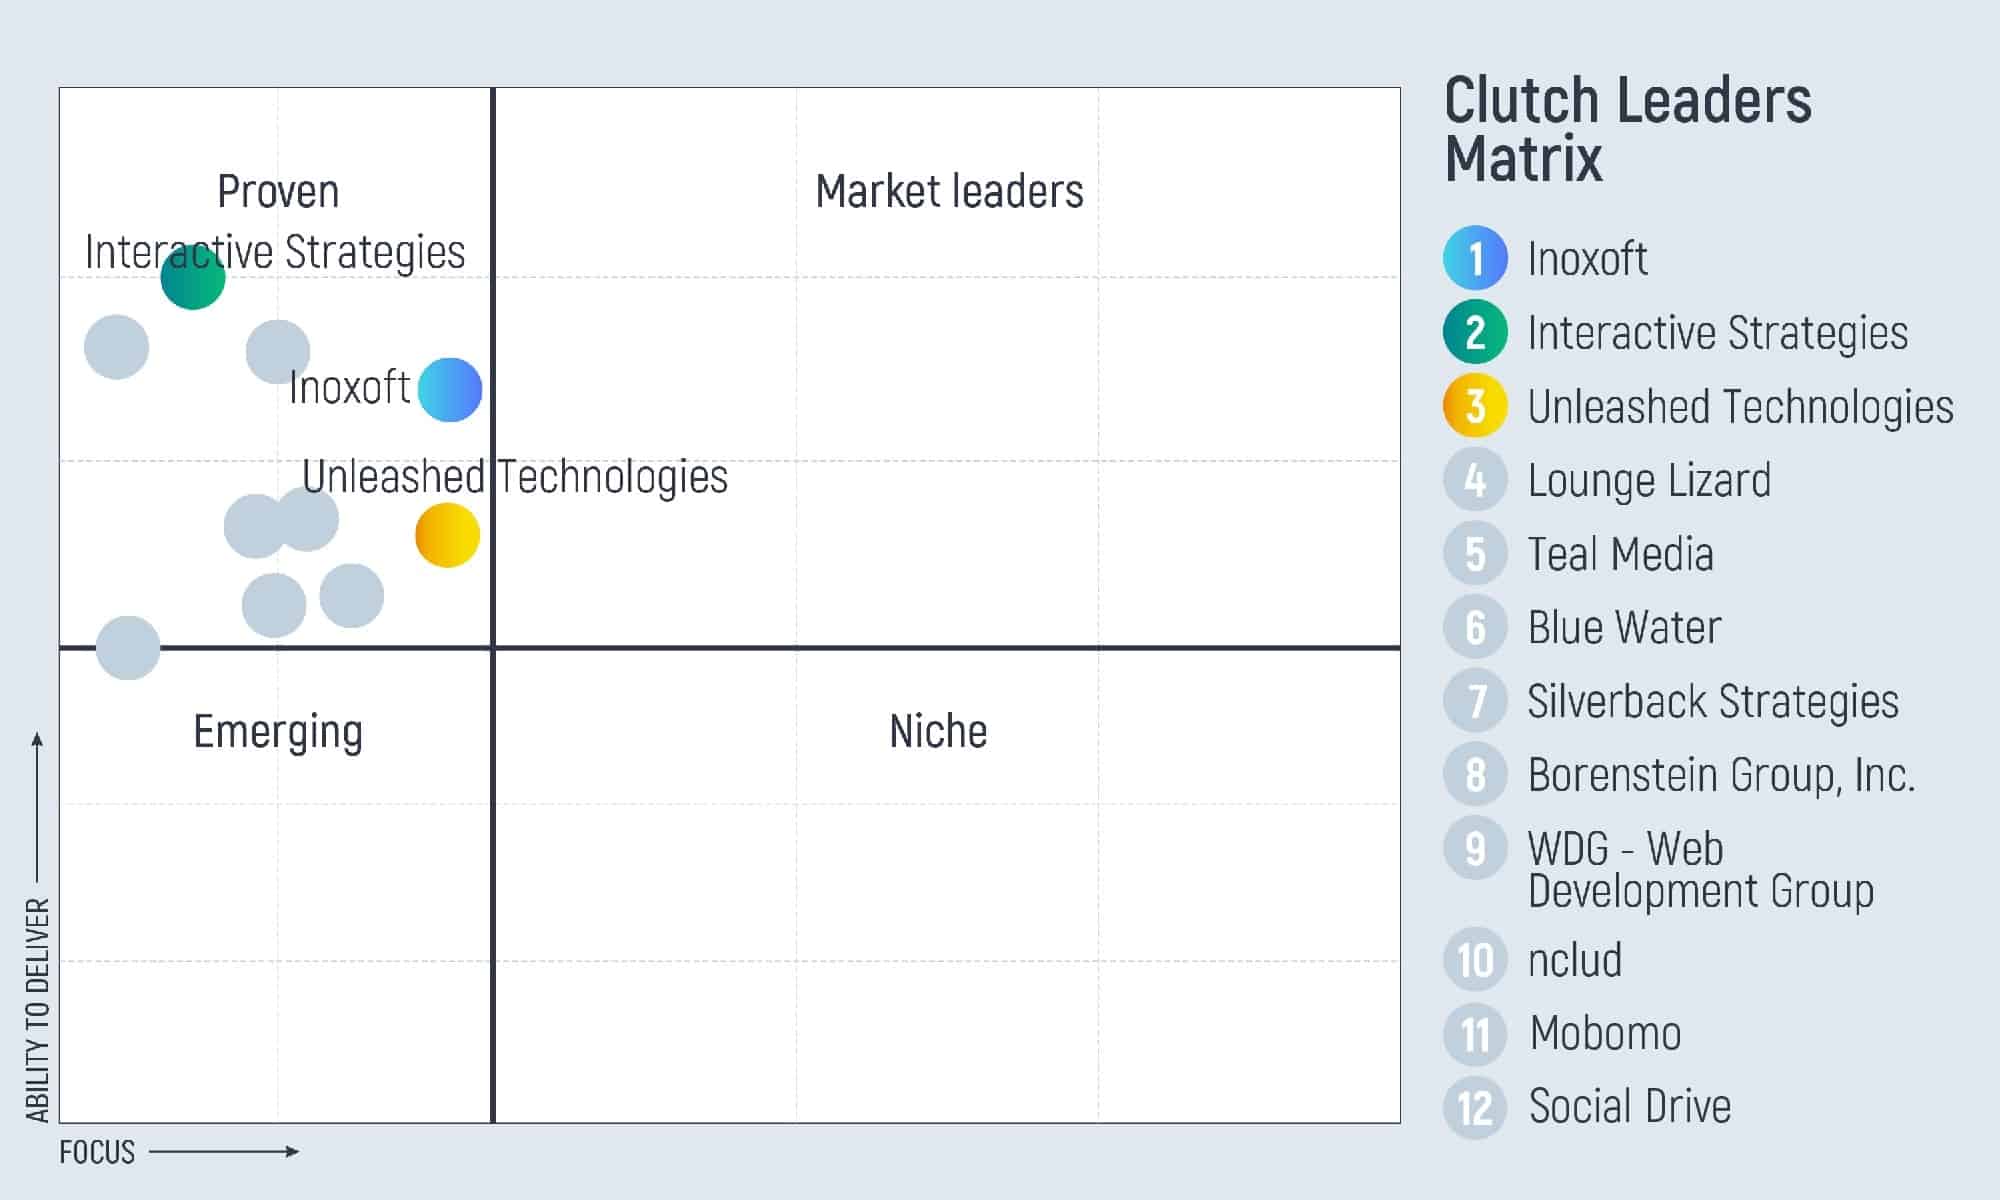 Clutch's leader matrix with the top 10 best web developers in Washington